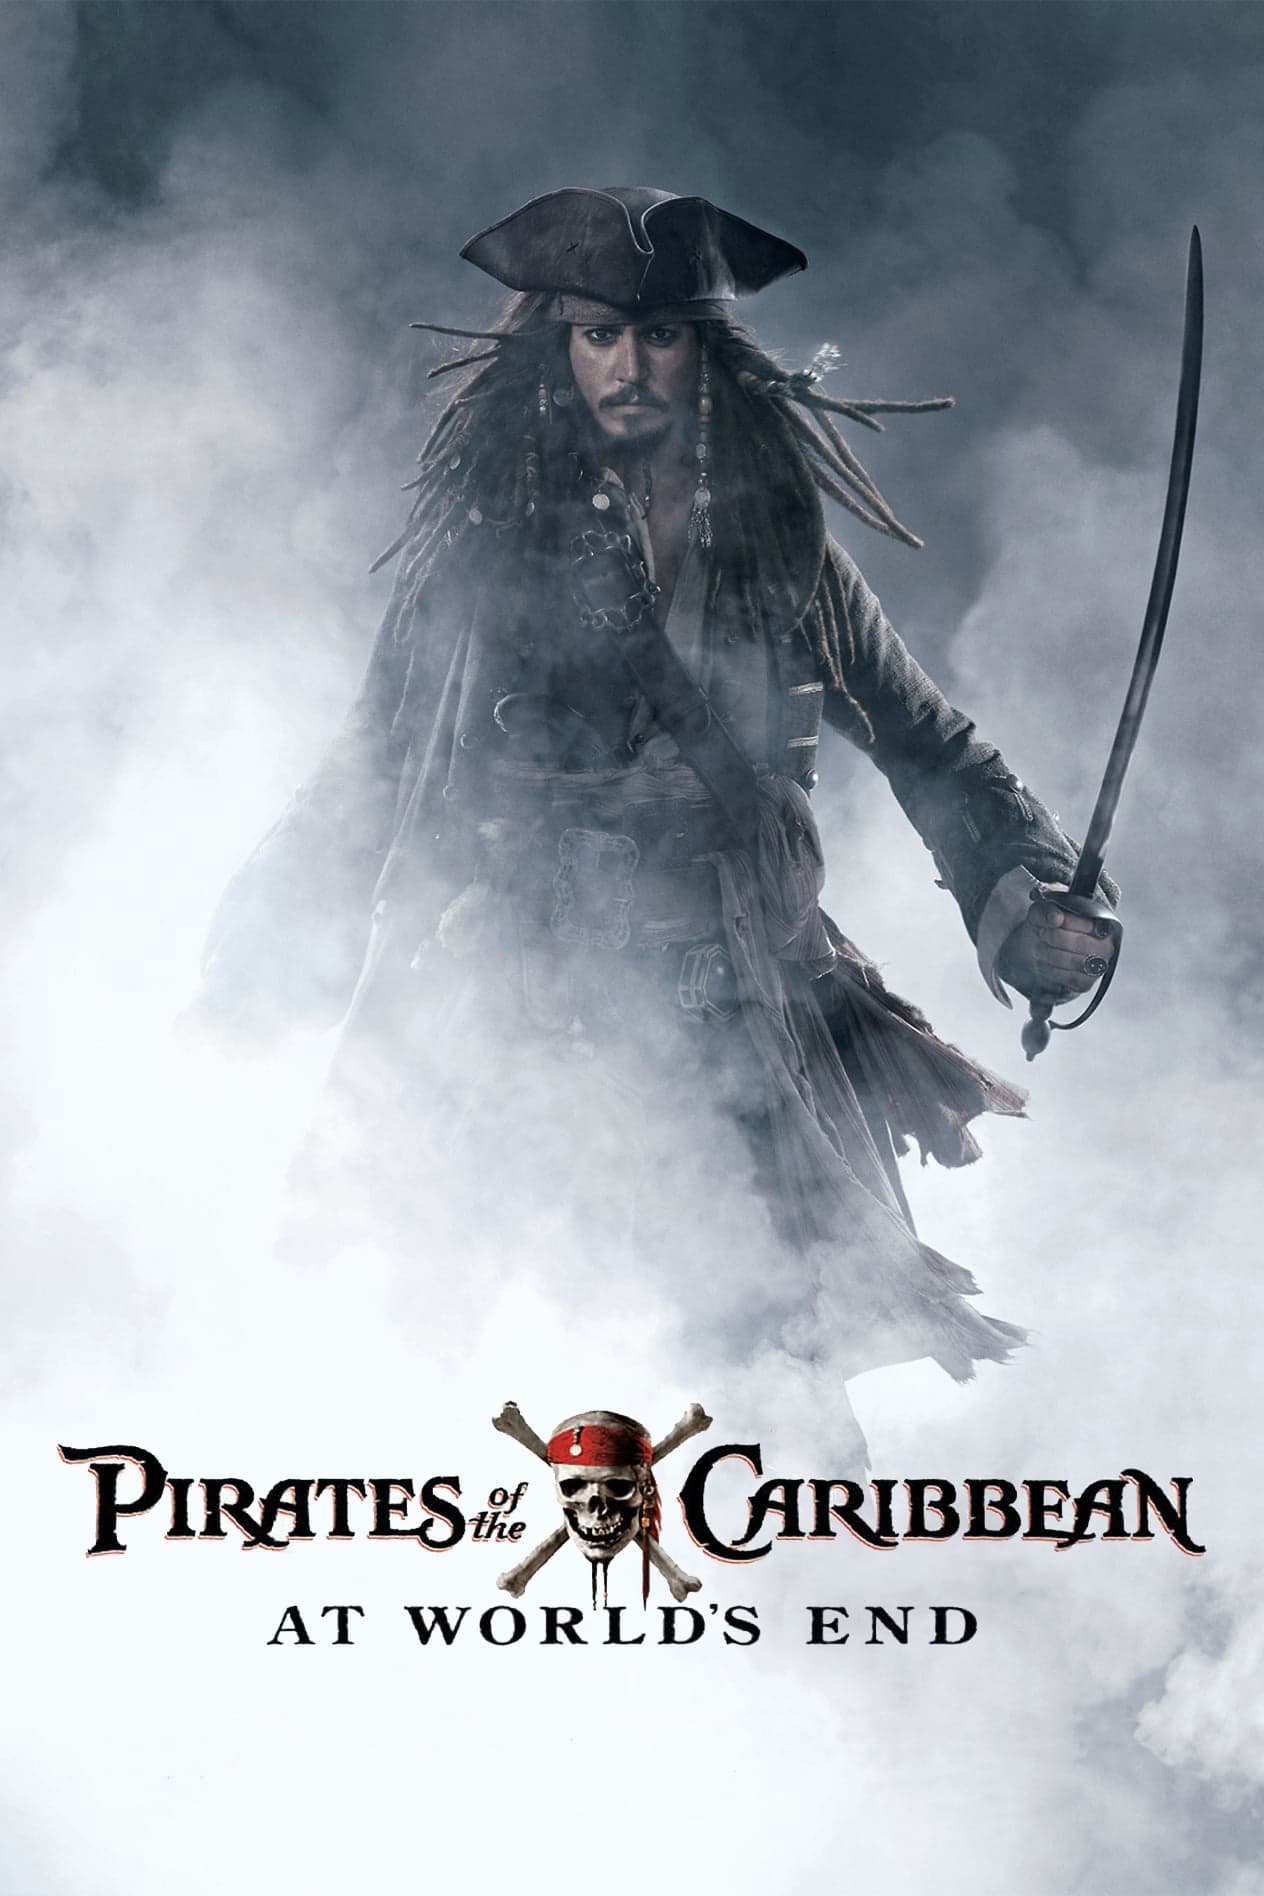 The Pirates of the Caribbean: At World’s End